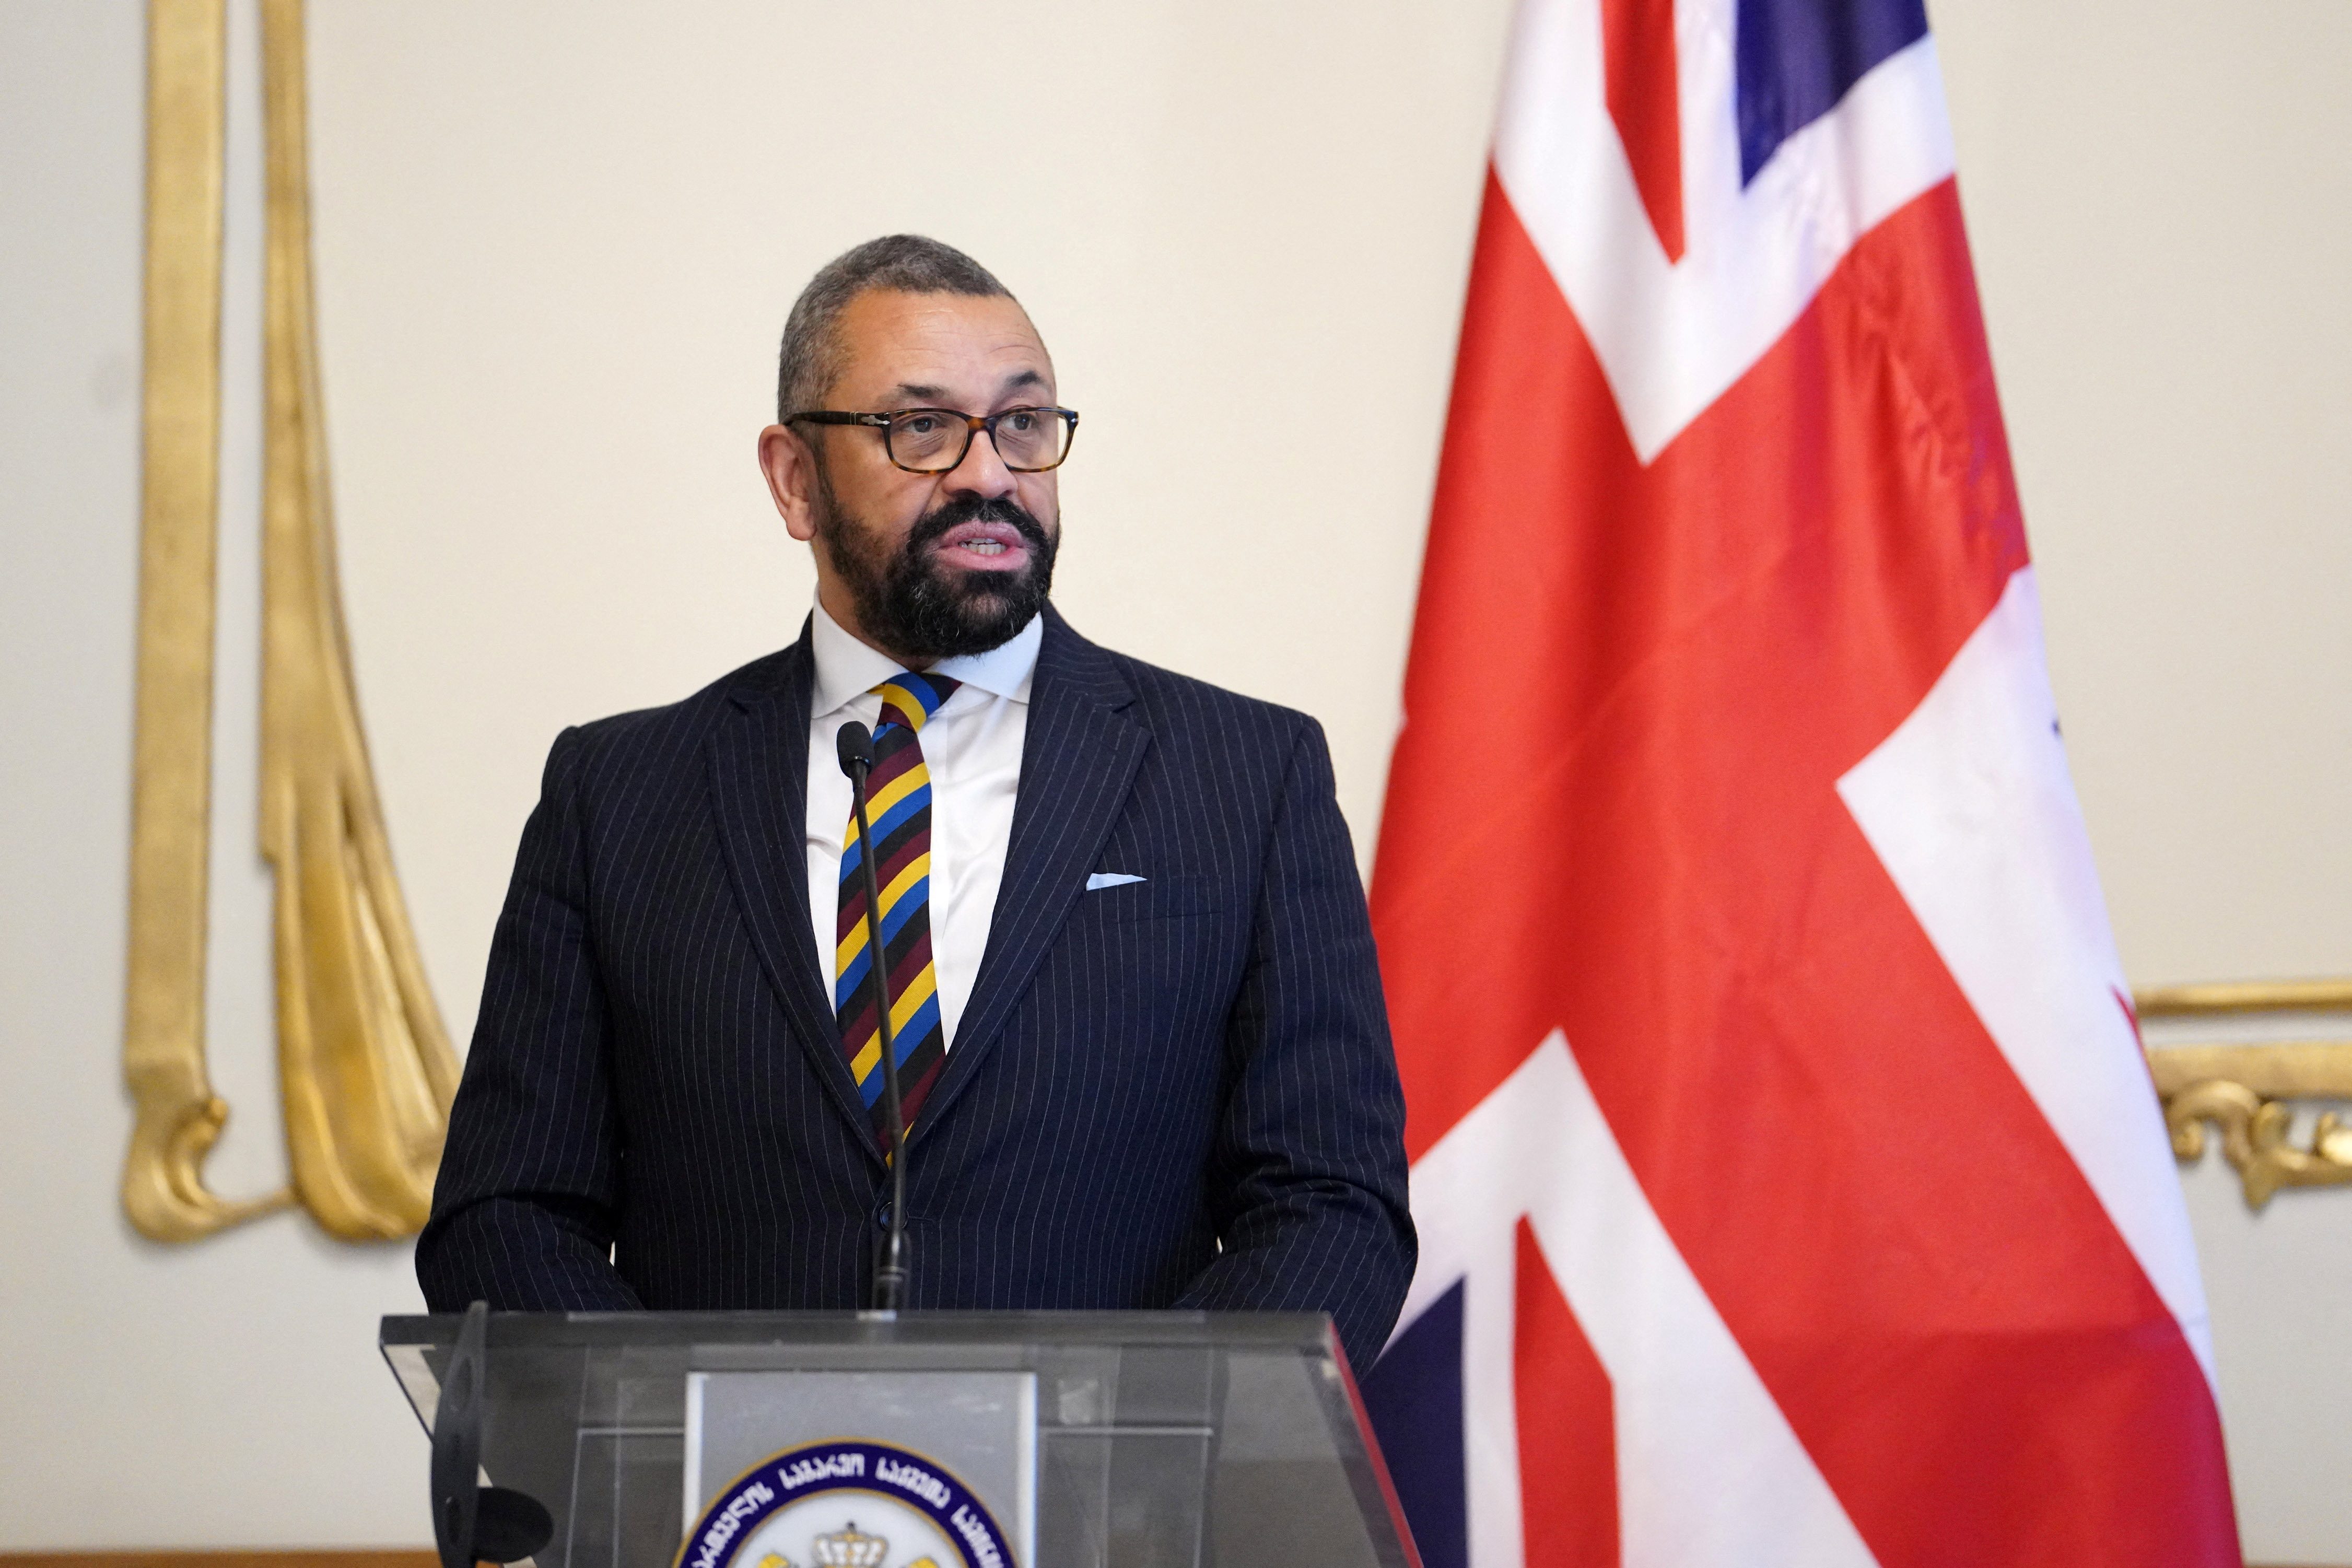 British Foreign Secretary James Cleverly meets with Georgian Foreign Minister Ilia Darchiashvili in Tbilisi